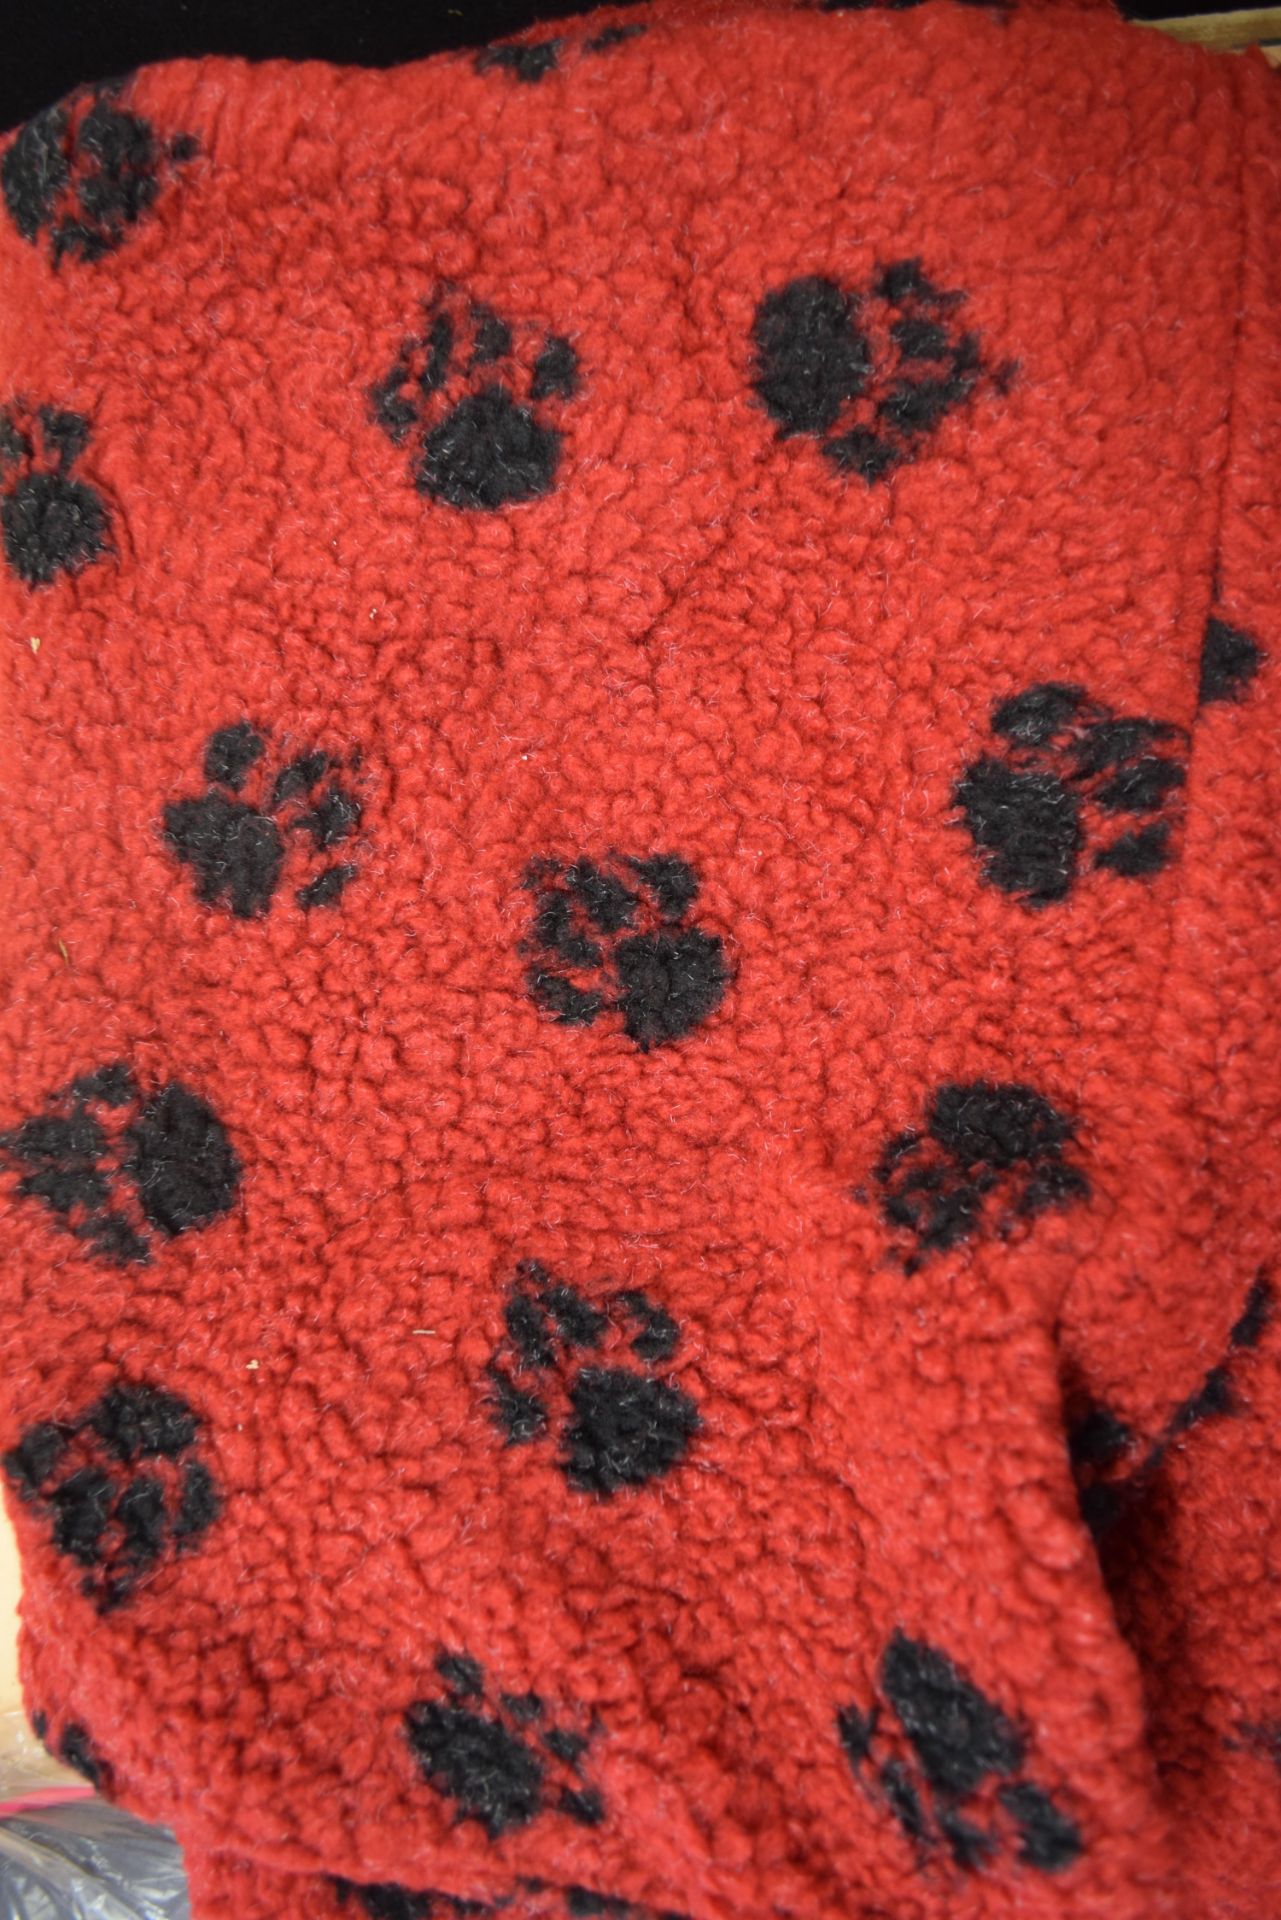 DOG BED COVER/FLEECE - Image 2 of 2